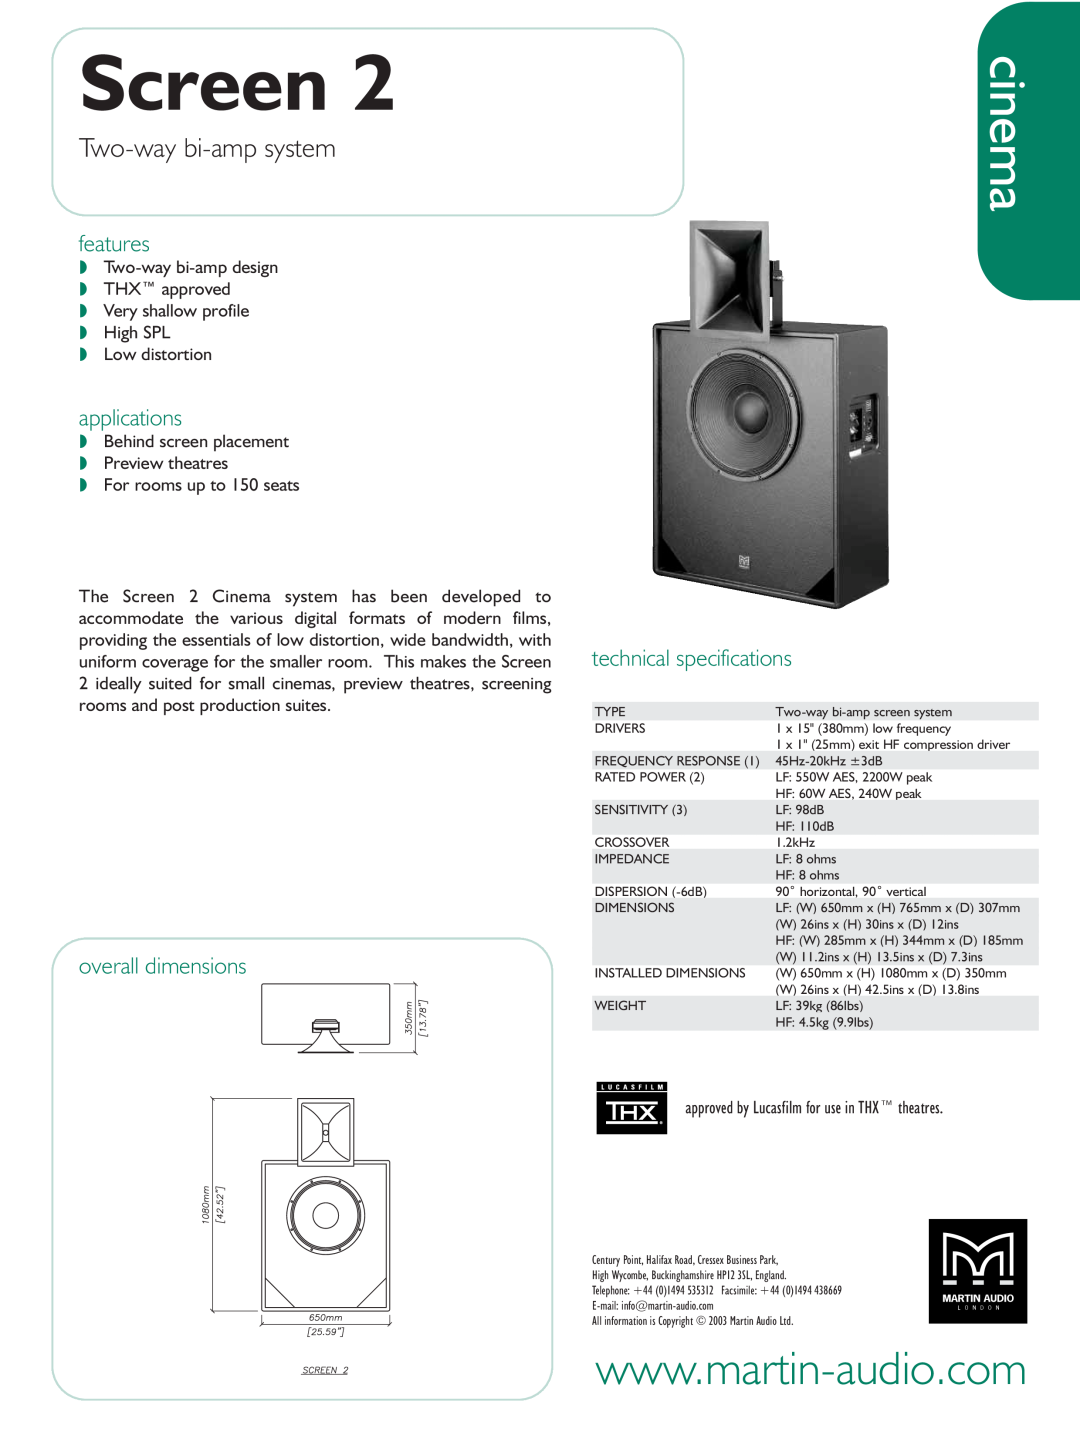 Martin Audio Screen 2 technical specifications cinema, Two-way bi-ampsystem, features, applications, overall dimensions 